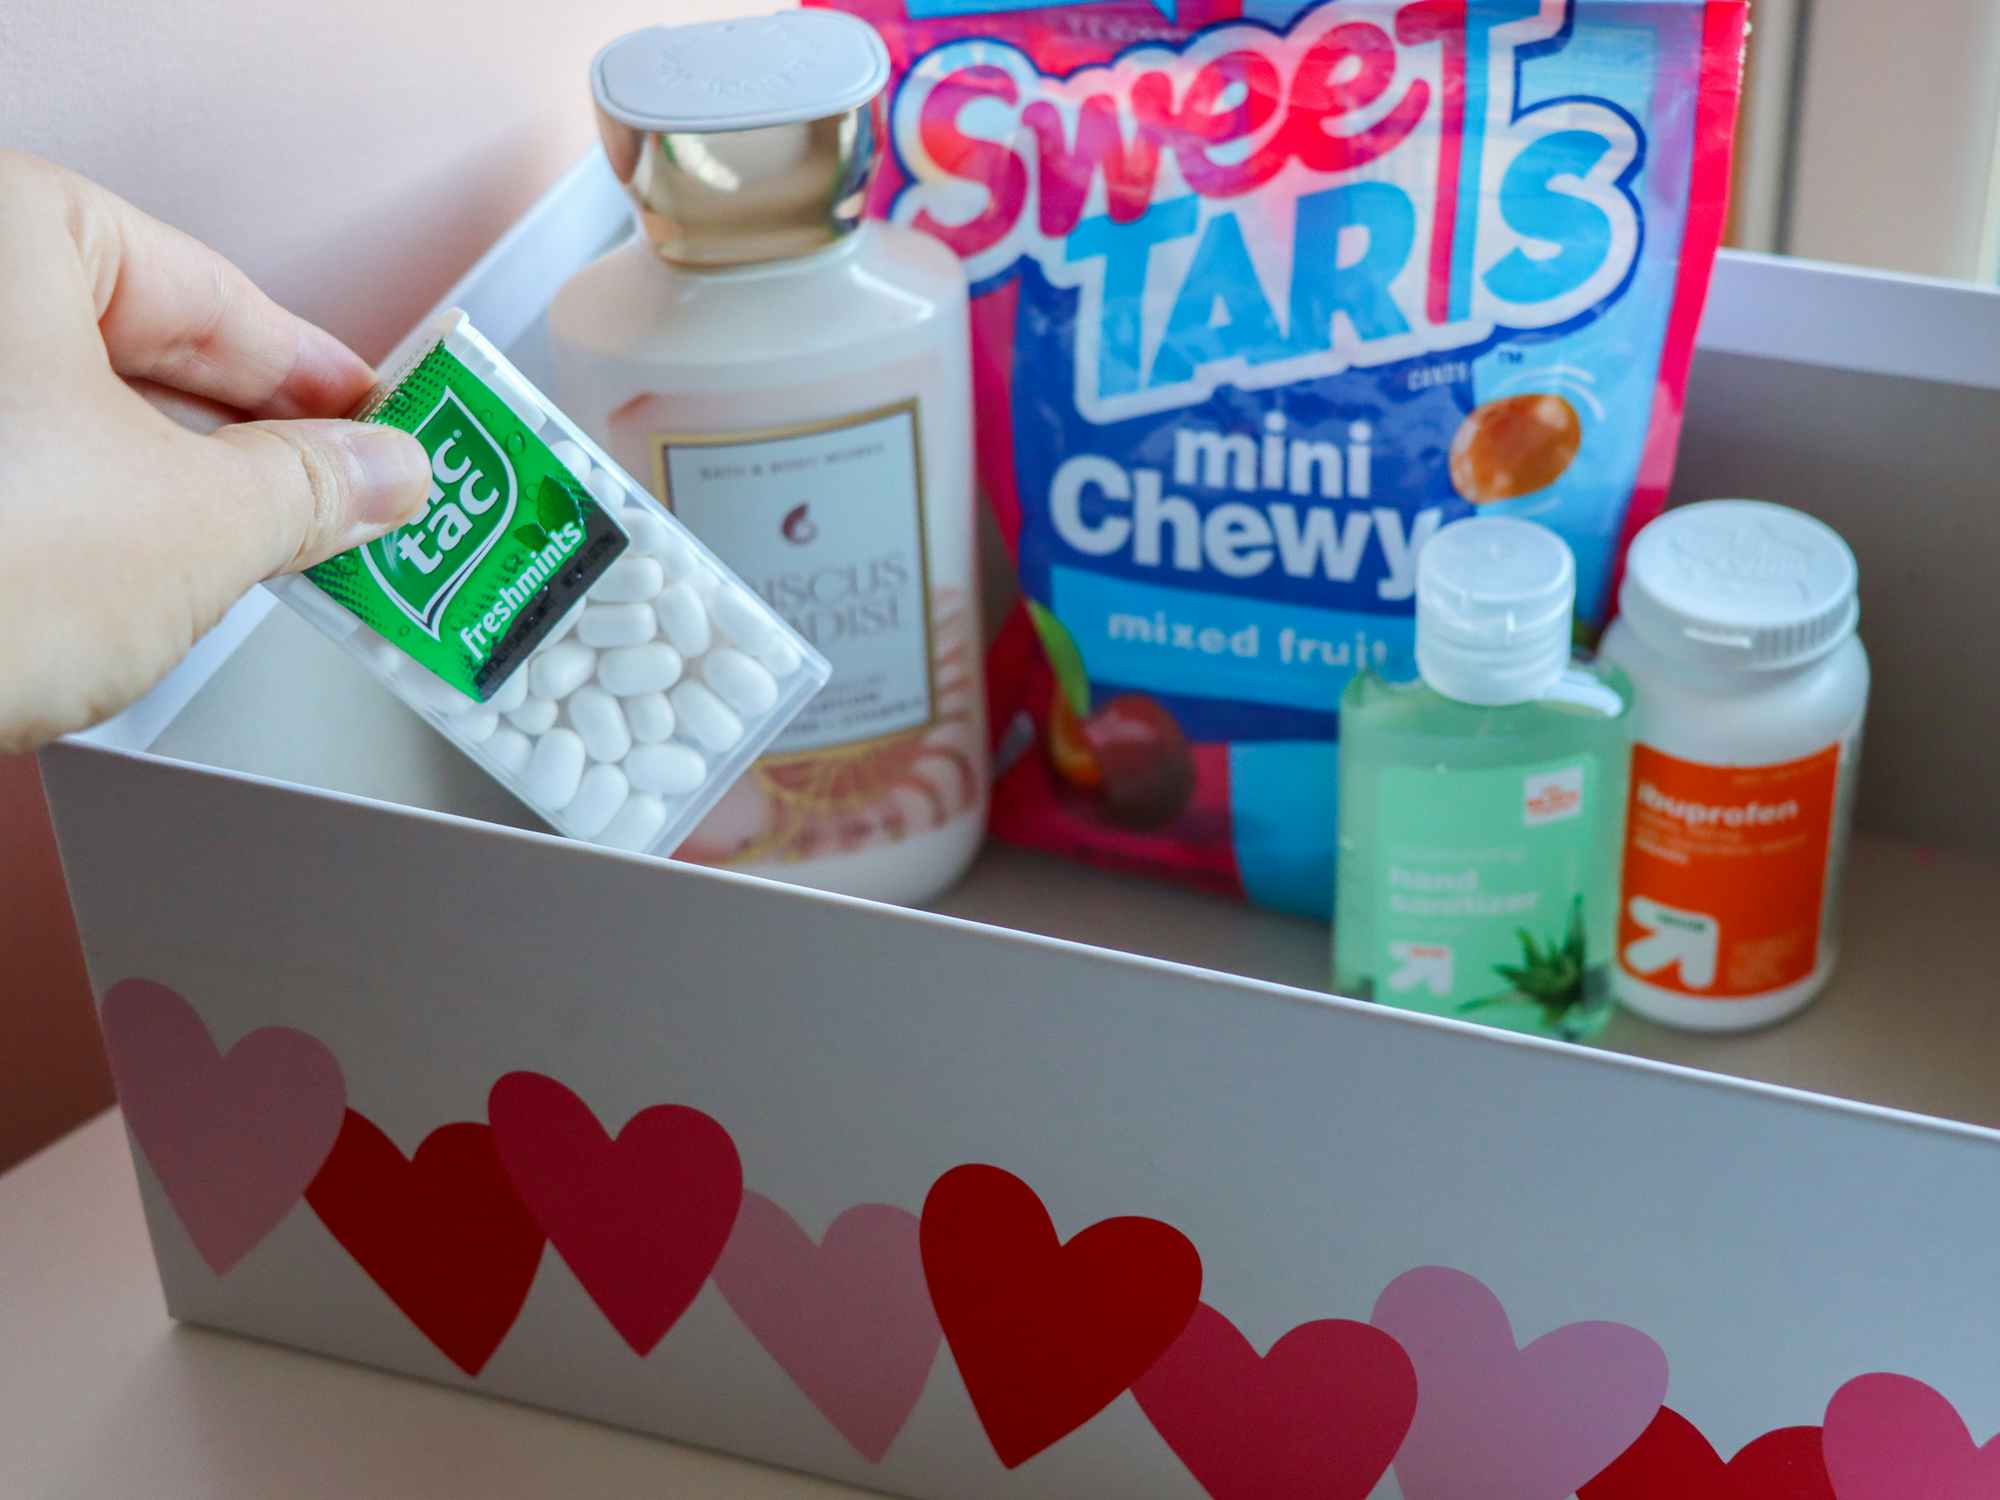 a person putting tic tacs into a box with other items